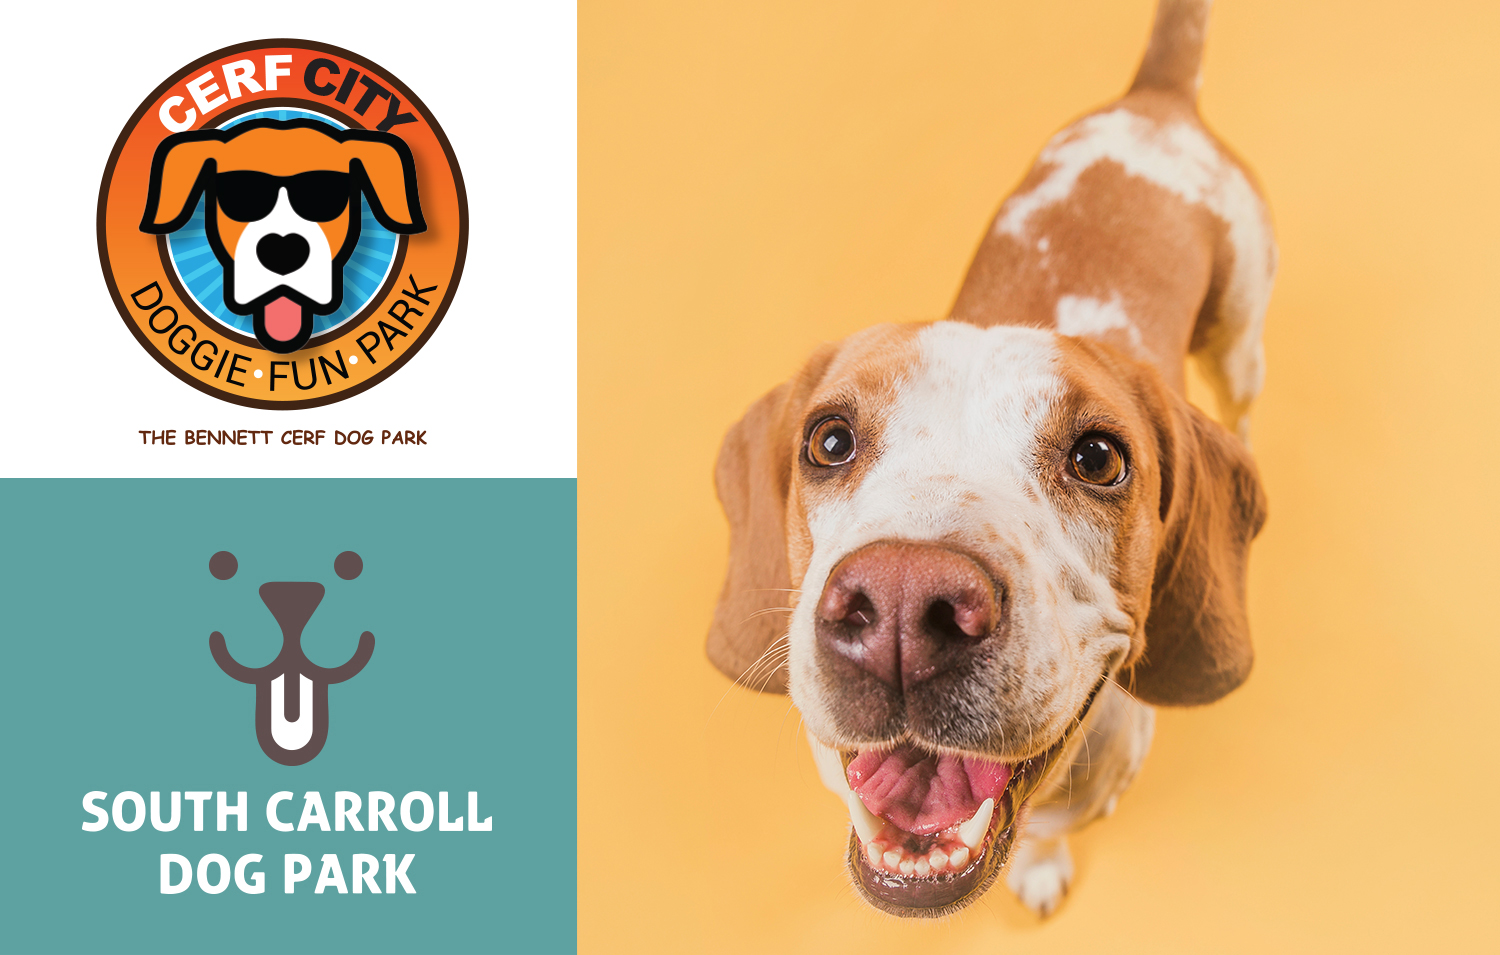 Dog Park Membership Form and Release of Liability